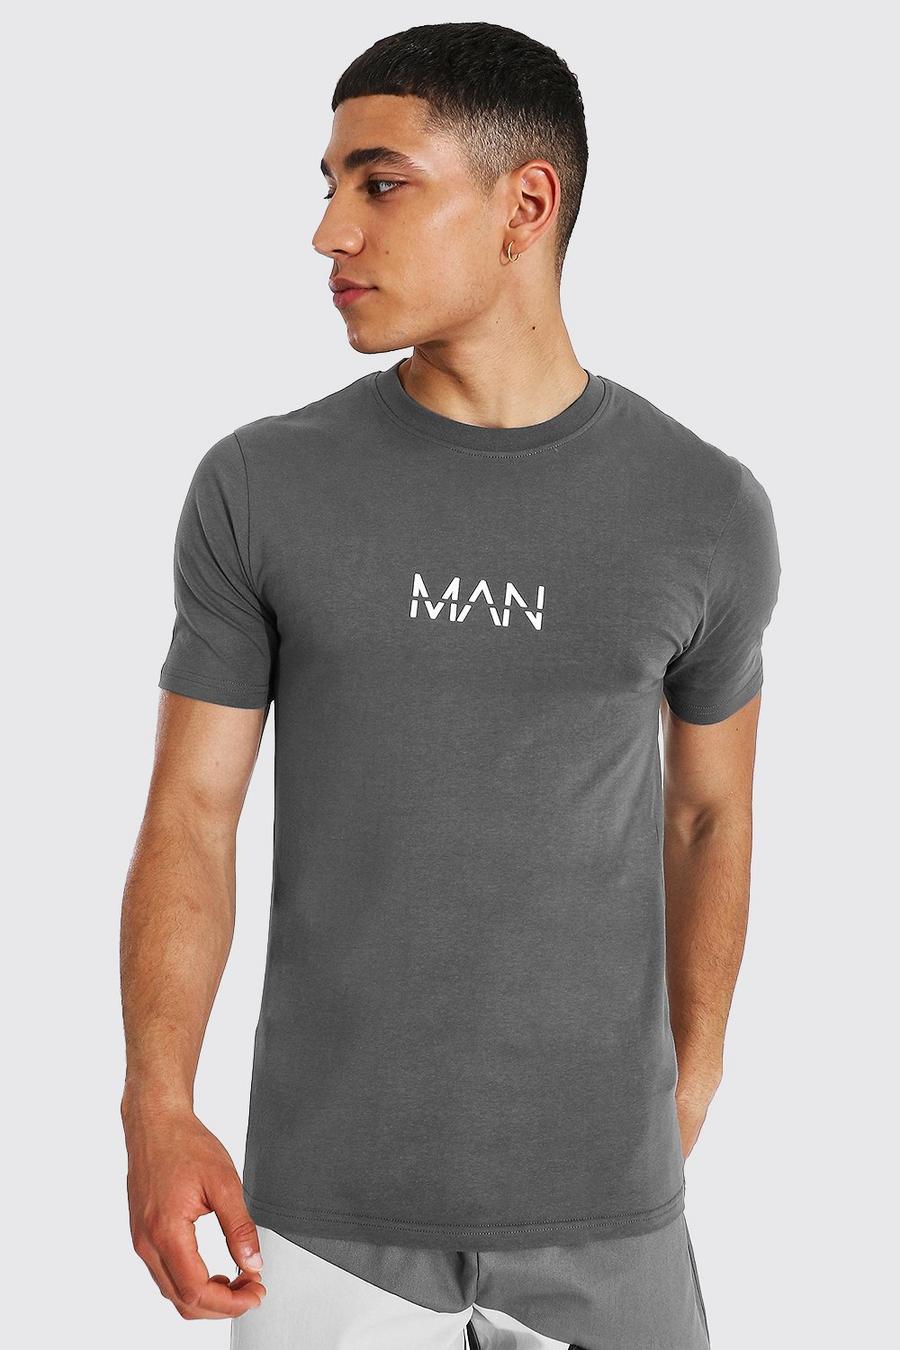 Charcoal grey Muscle Fit Original Man T-shirt image number 1